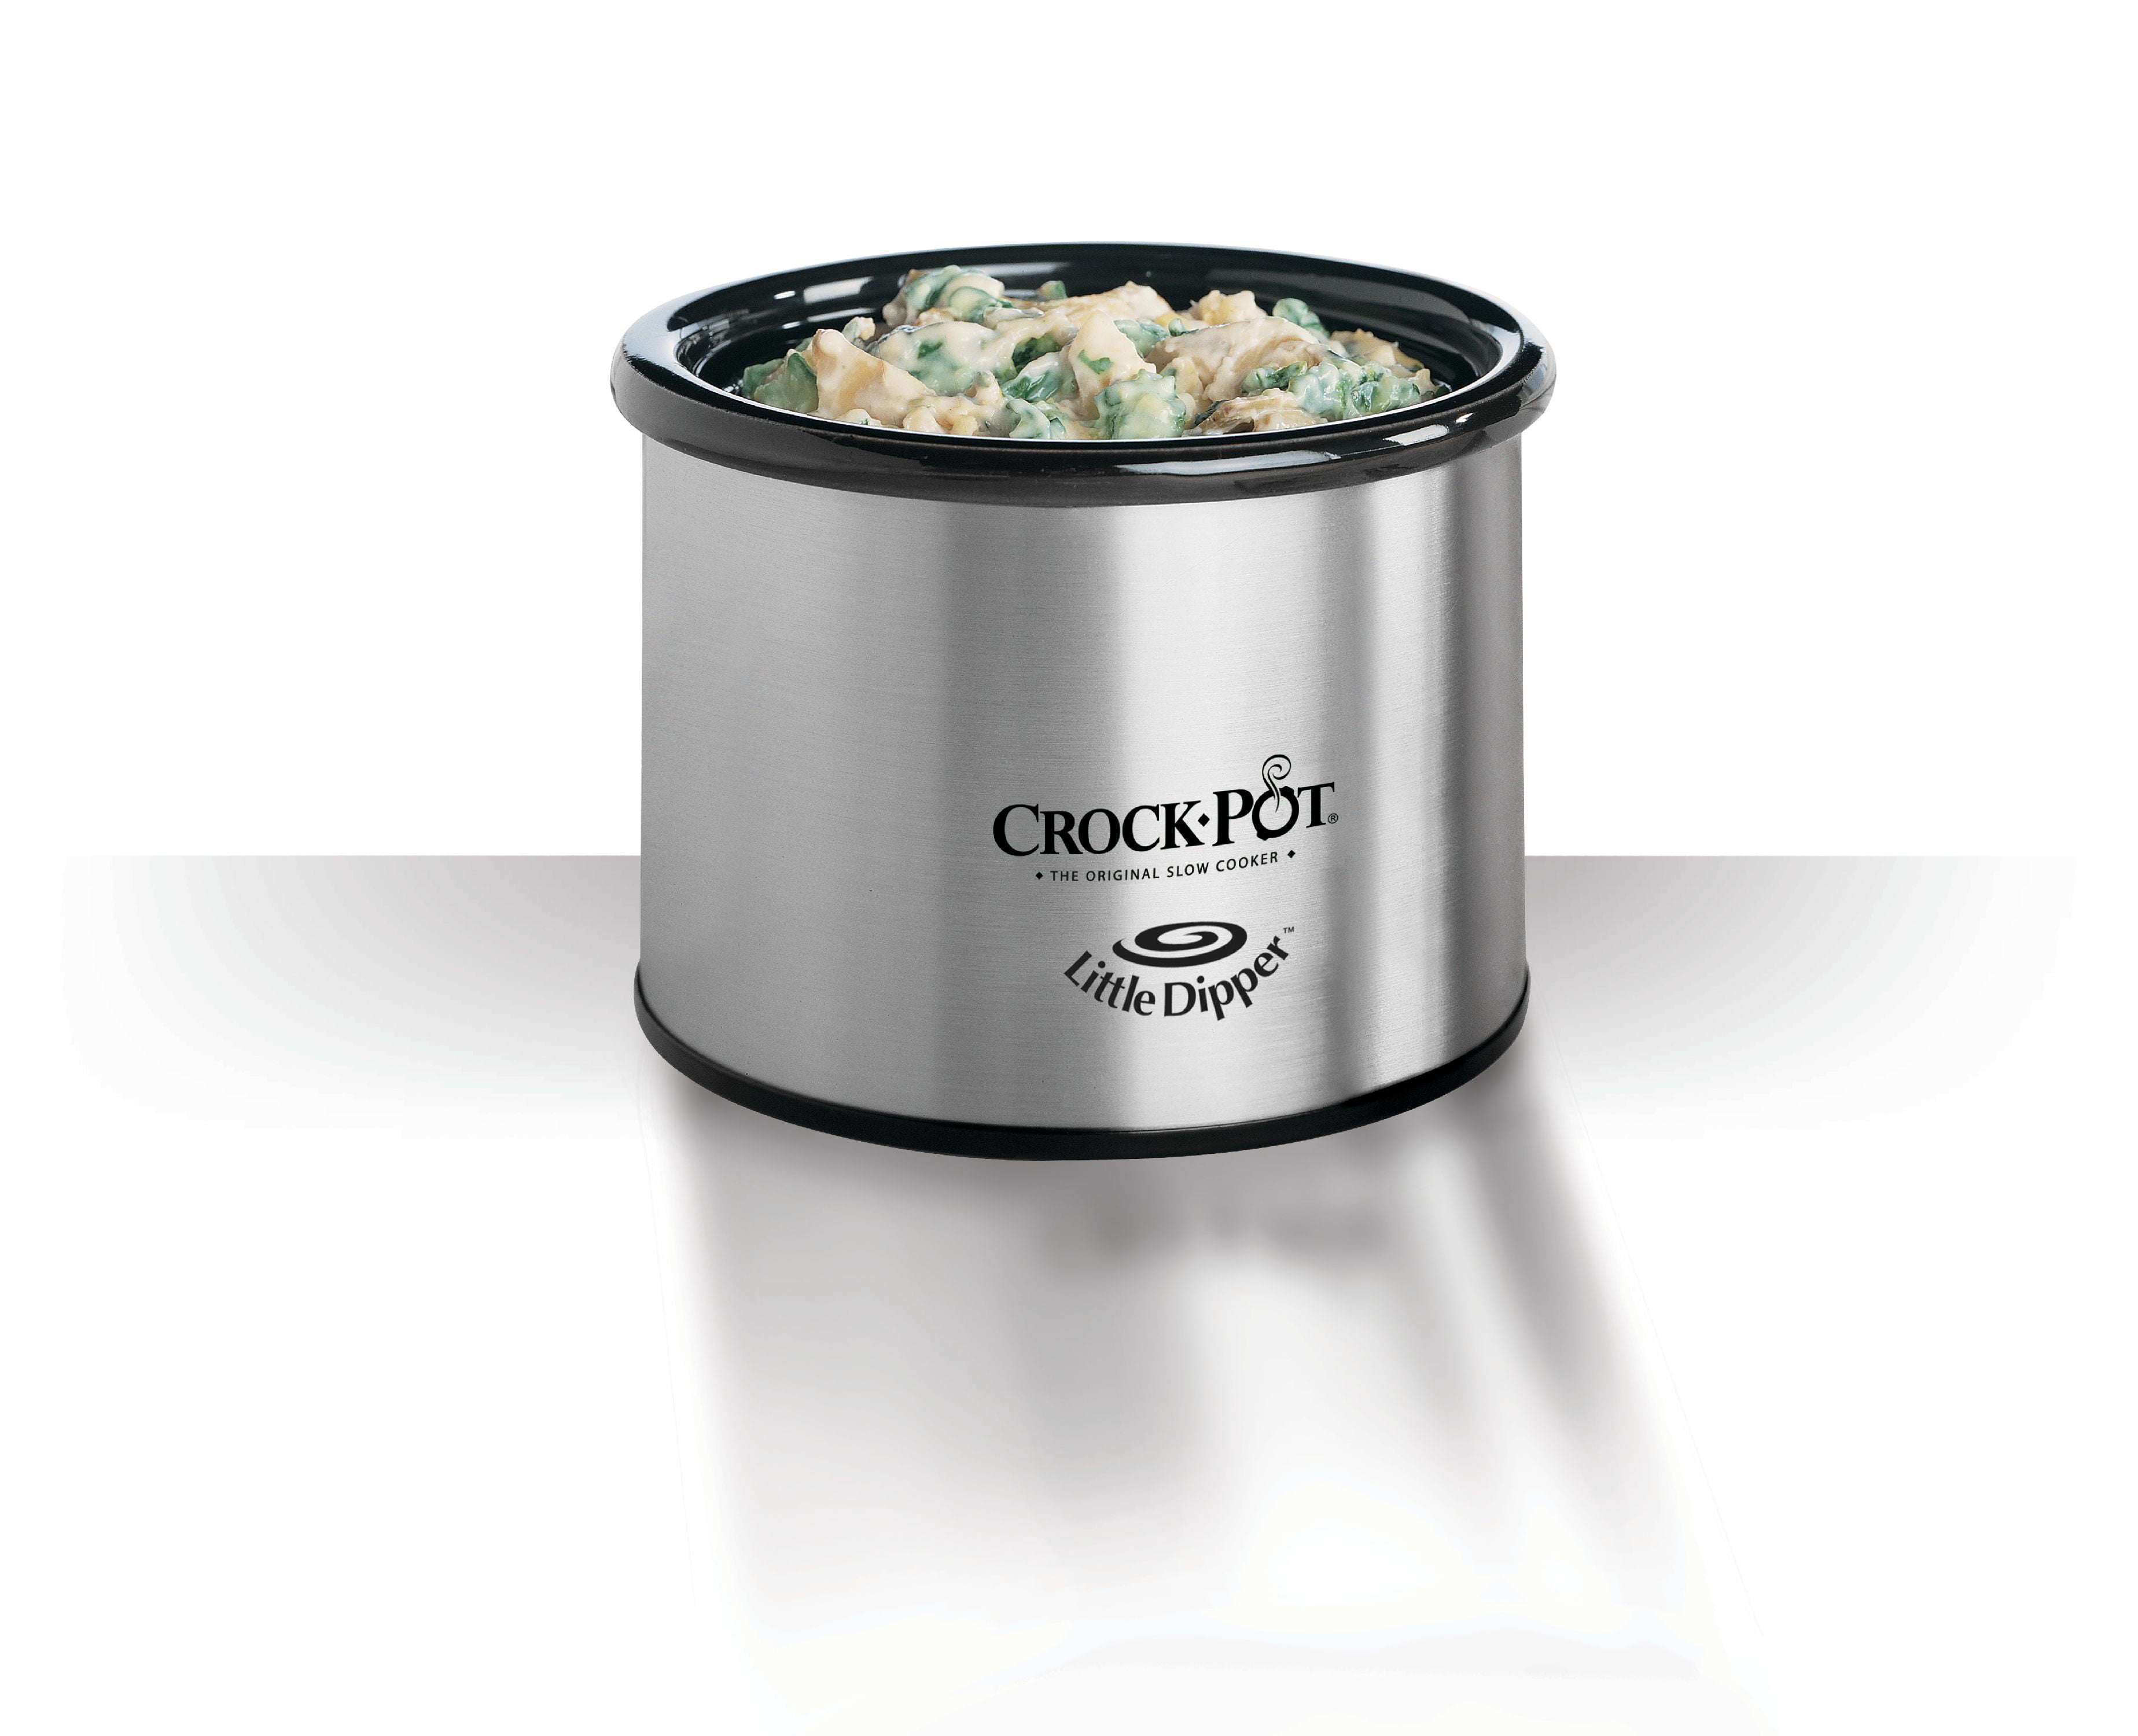 Crockpot™ 6-qt. Cook & Carry Manual Slow Cooker with Little Dipper Warmer